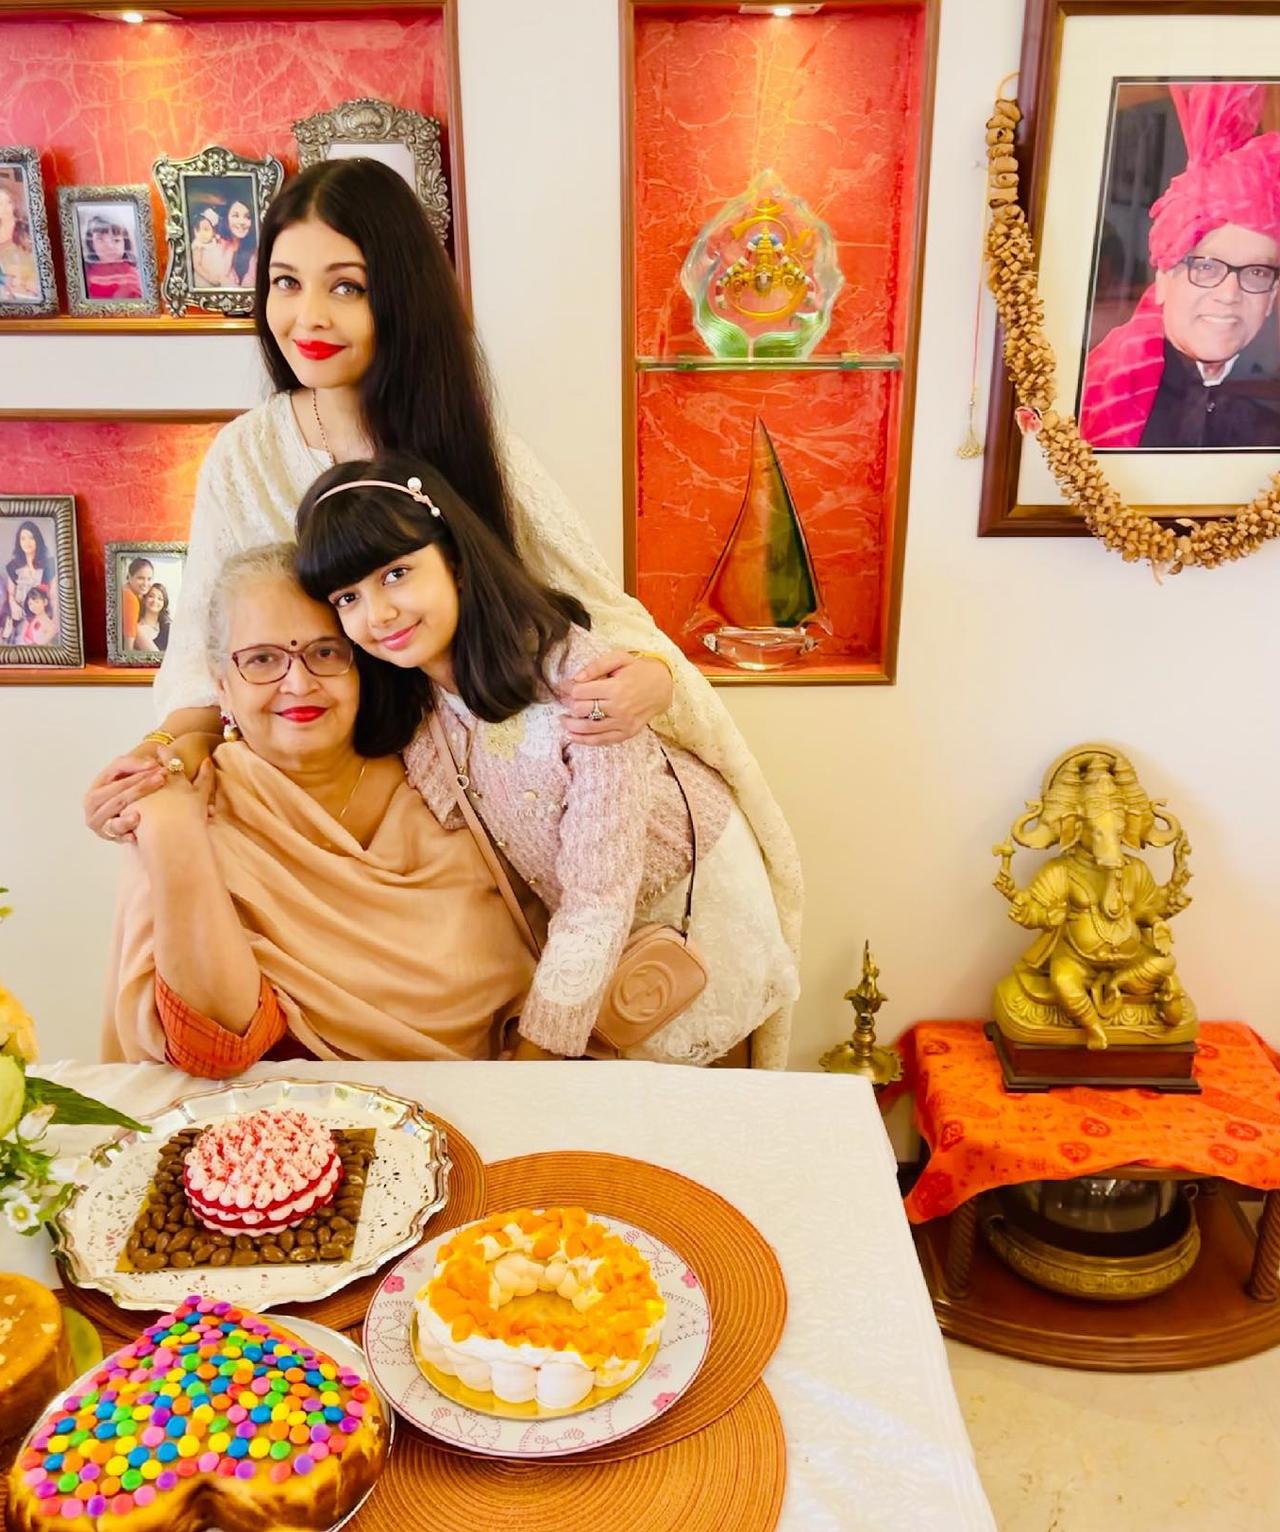 In another picture, the three generations posed together for an adorable click. It had the grandmother Bridna Rai, the mother Aishwarya Rai Bachchan, and the granddaughter Aaradhya. 